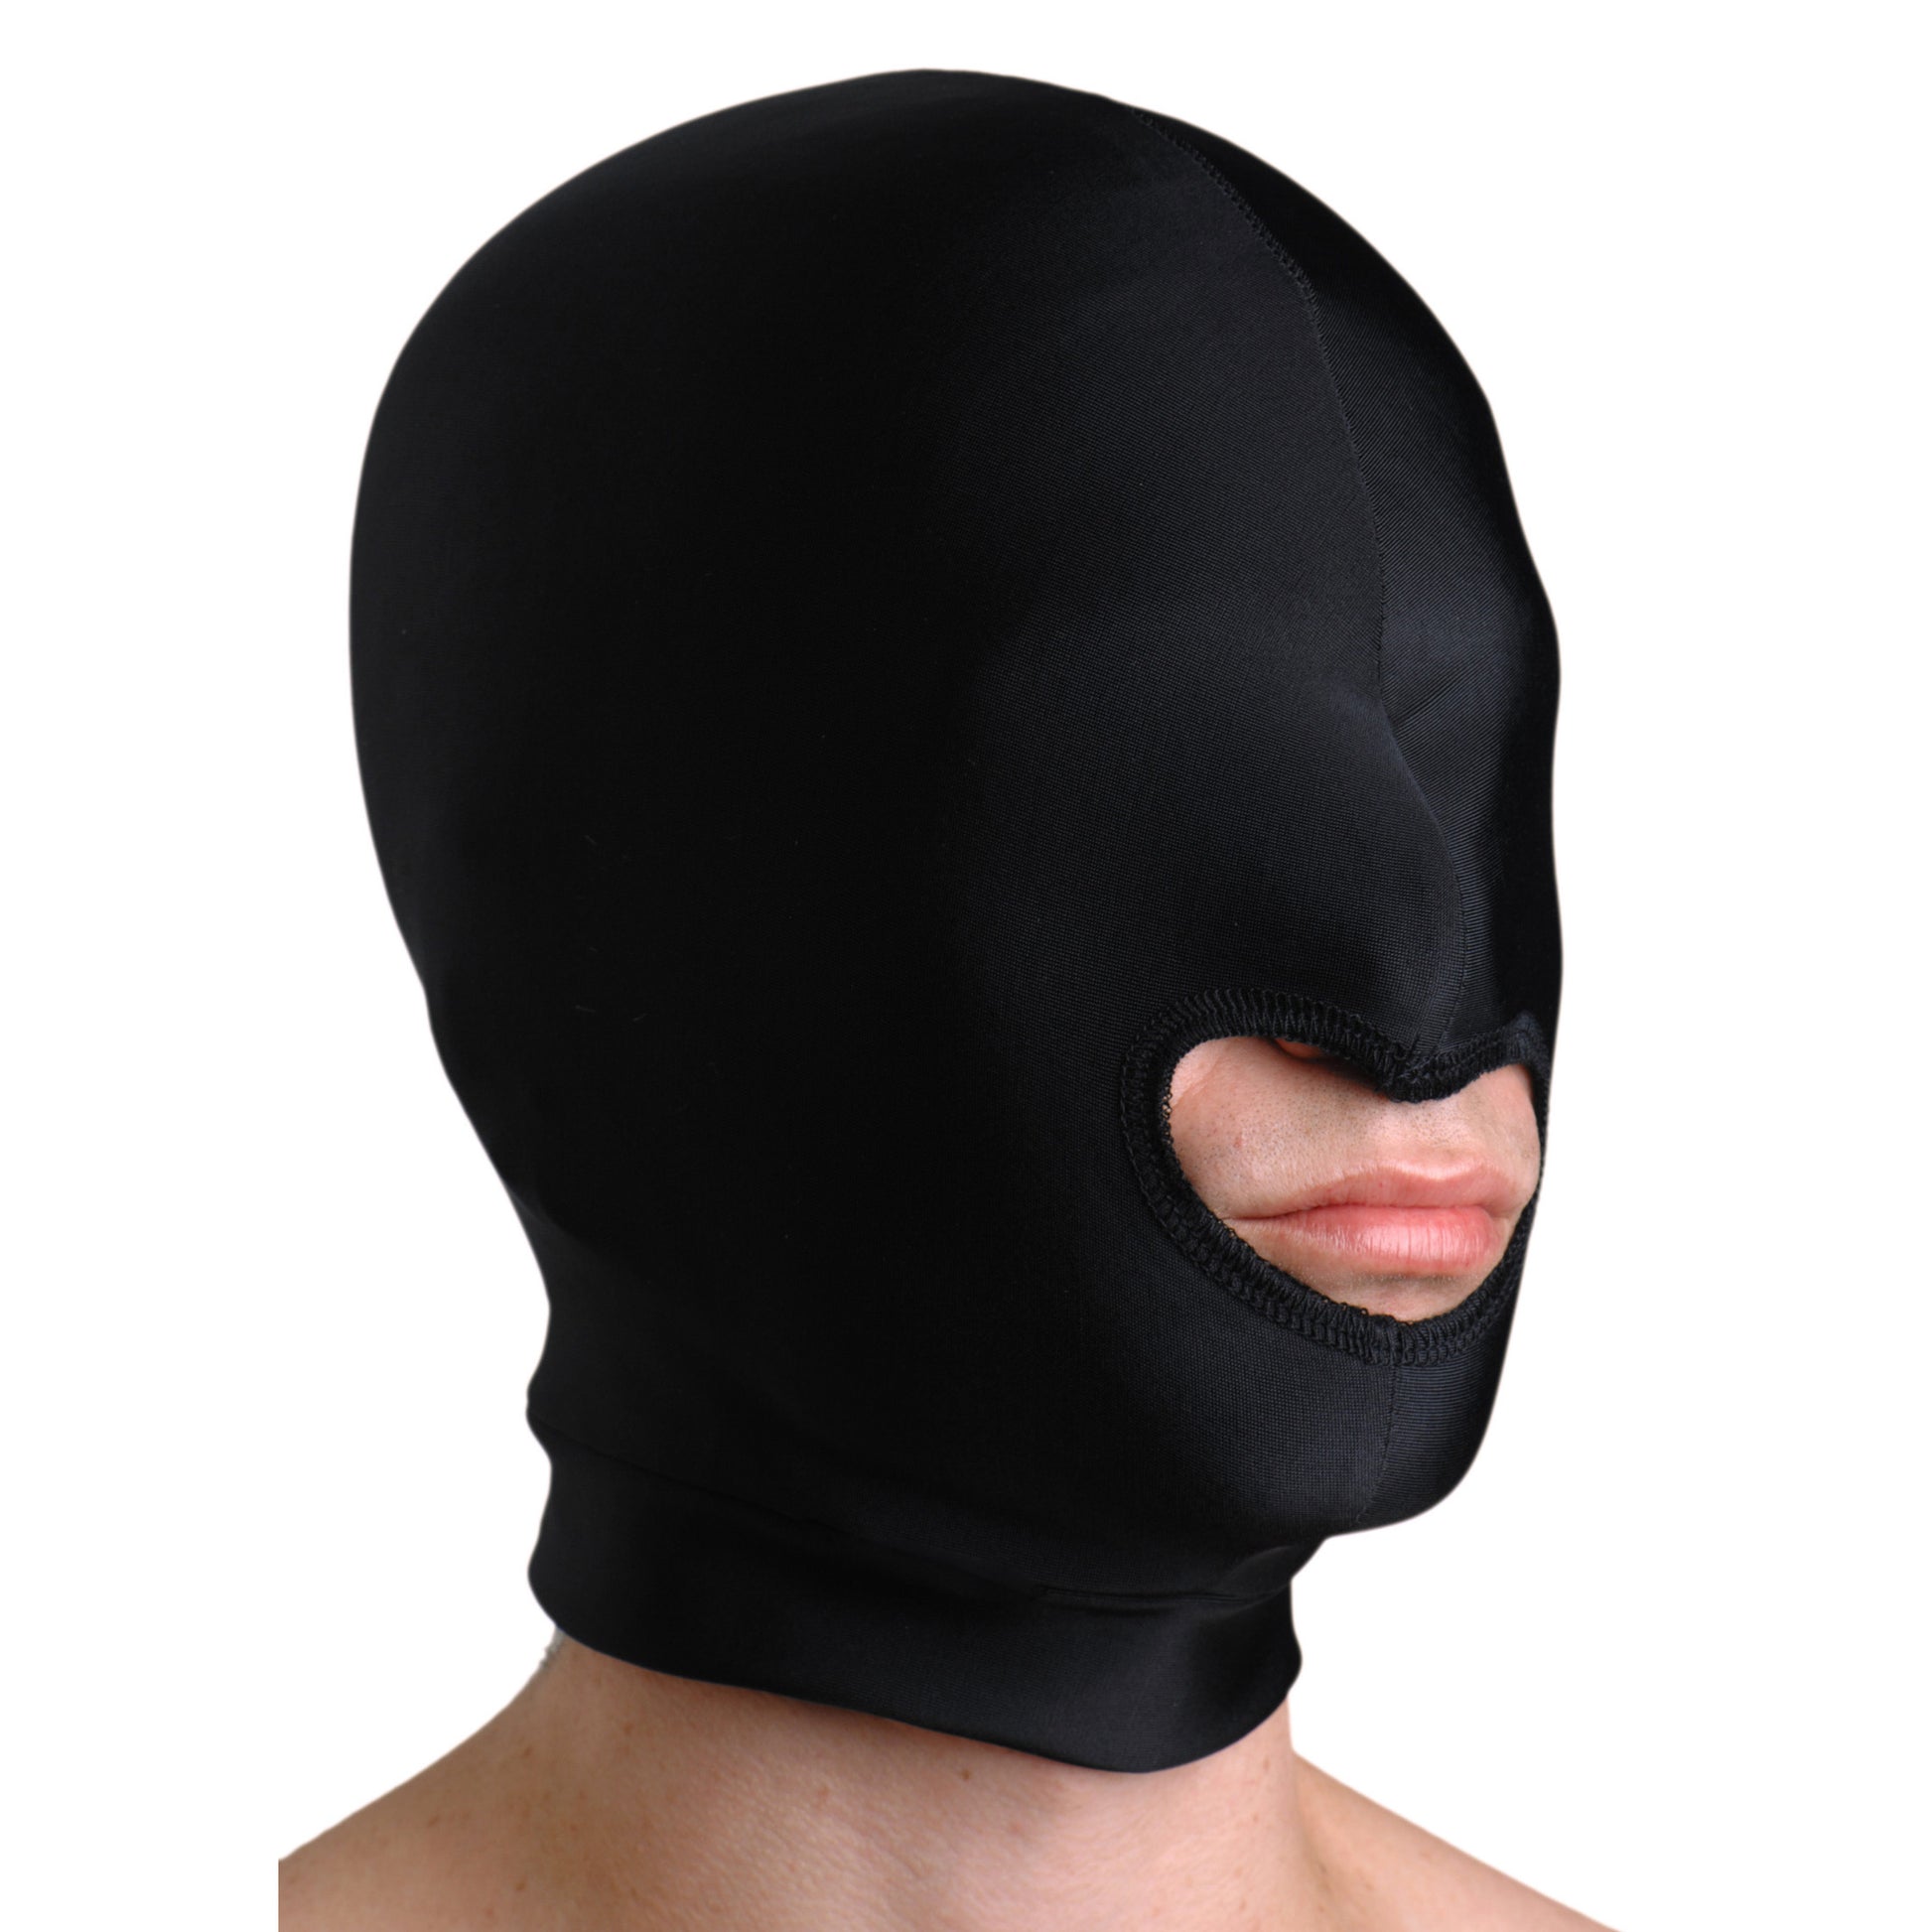 Premium Spandex Hood with Mouth Opening - UABDSM